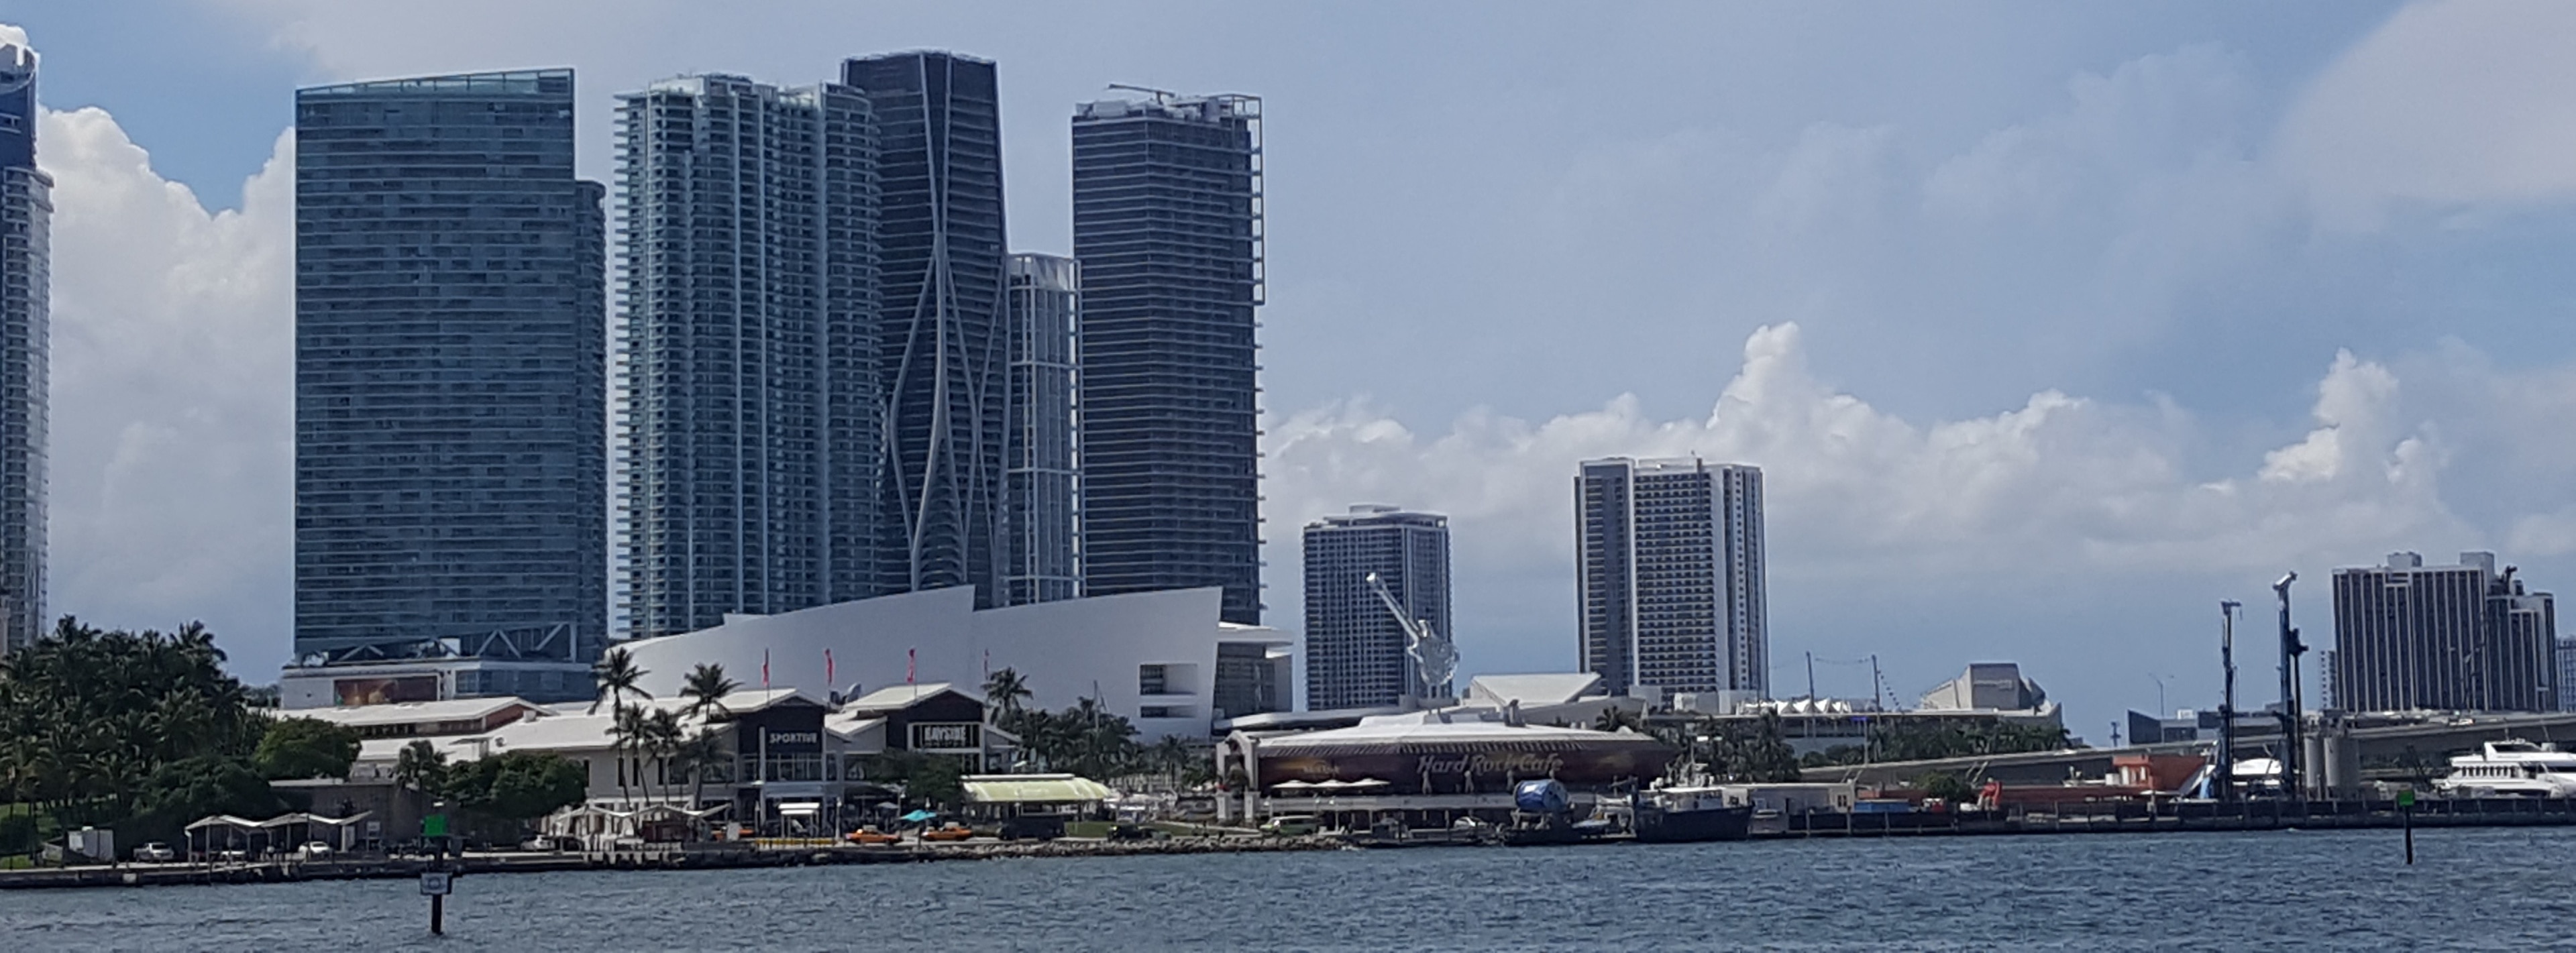 View of the Bayside Market area

-2019